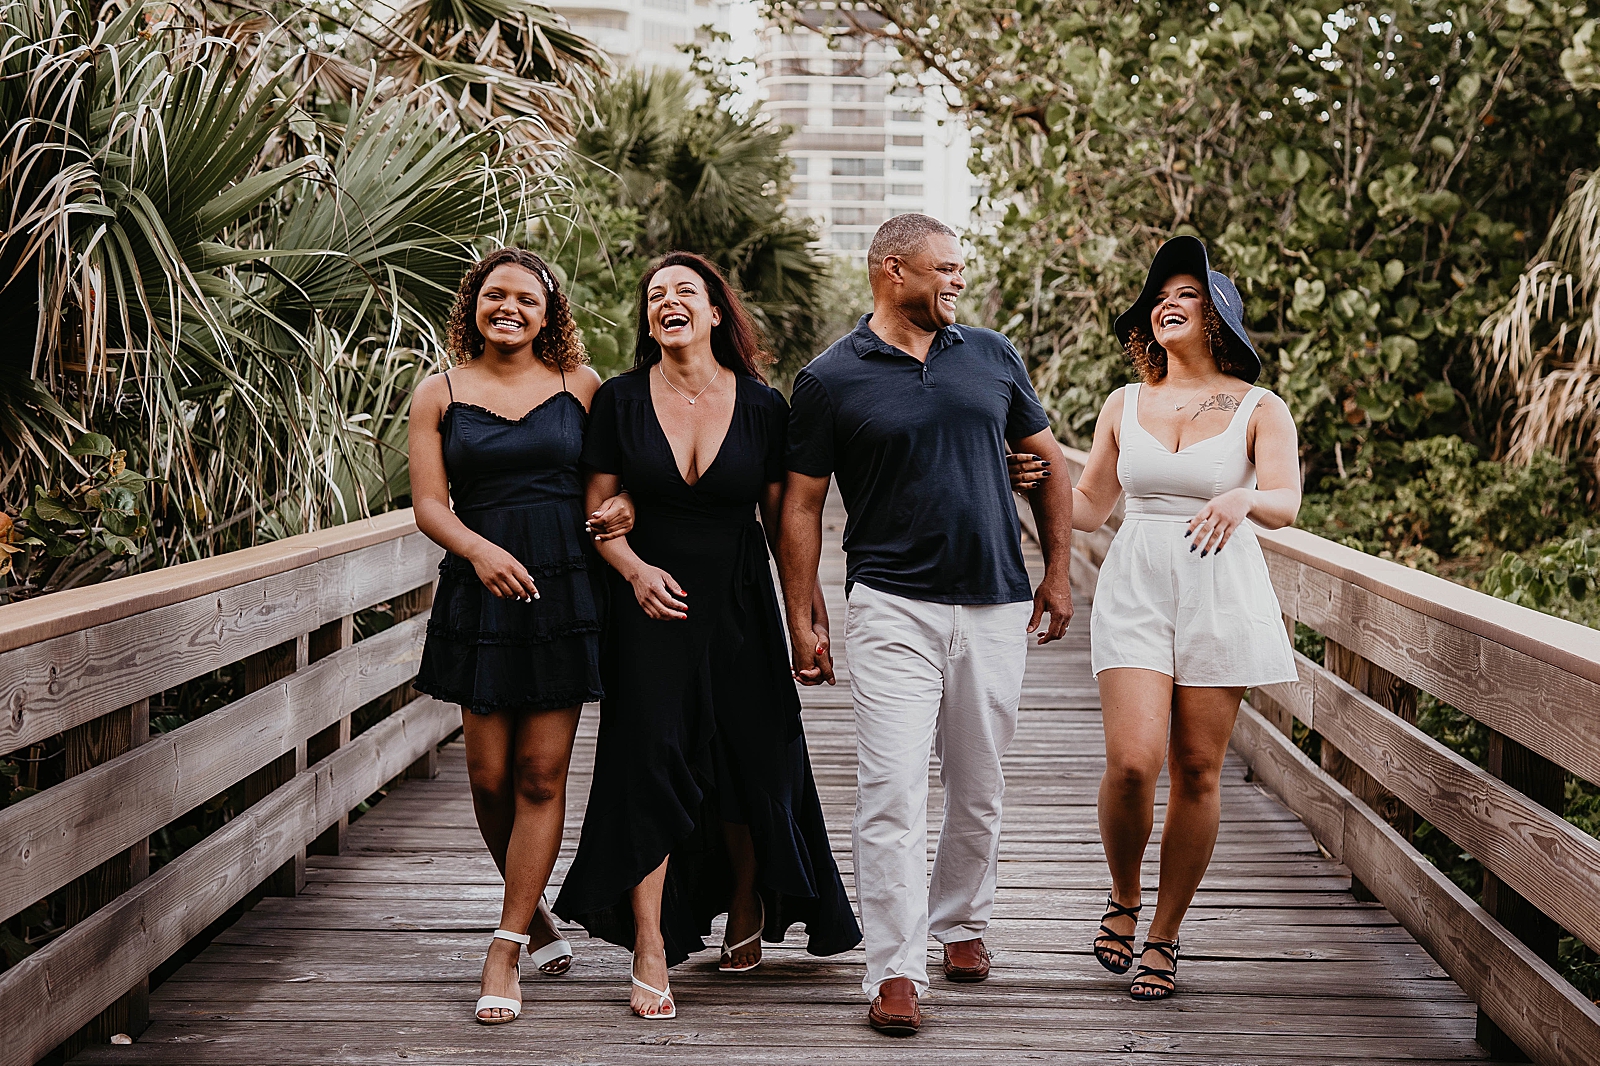 Family laughing together on the bridge